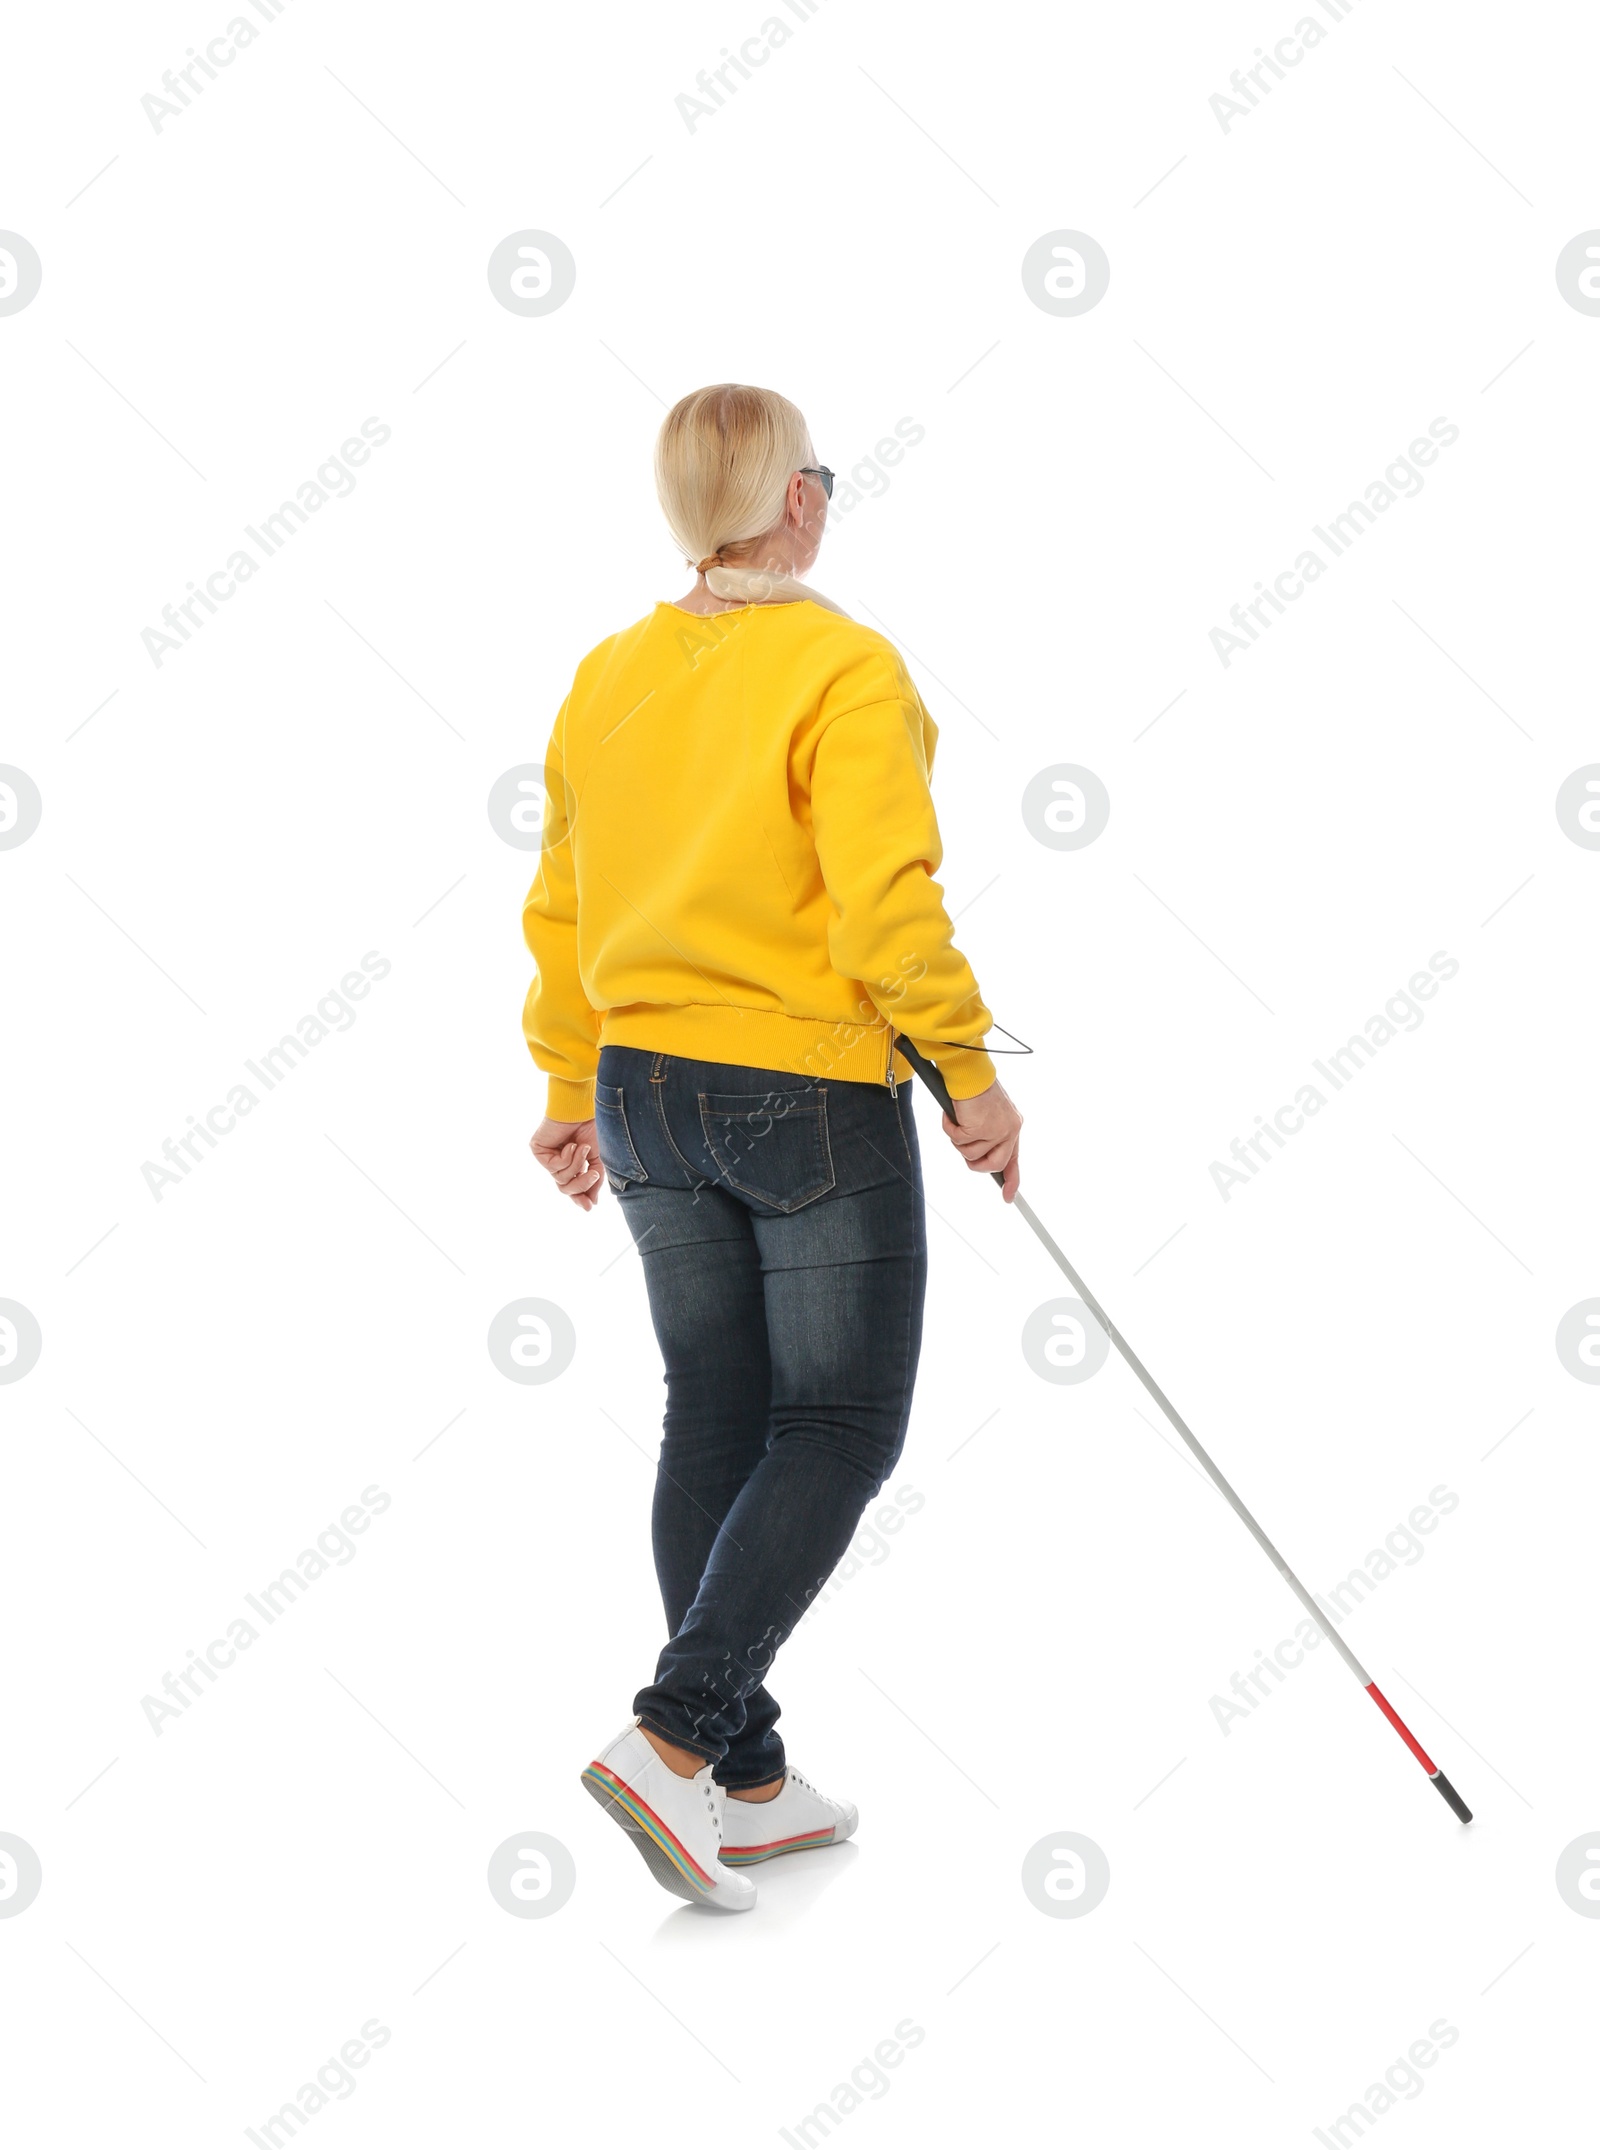 Photo of Mature blind person with long cane walking on white background